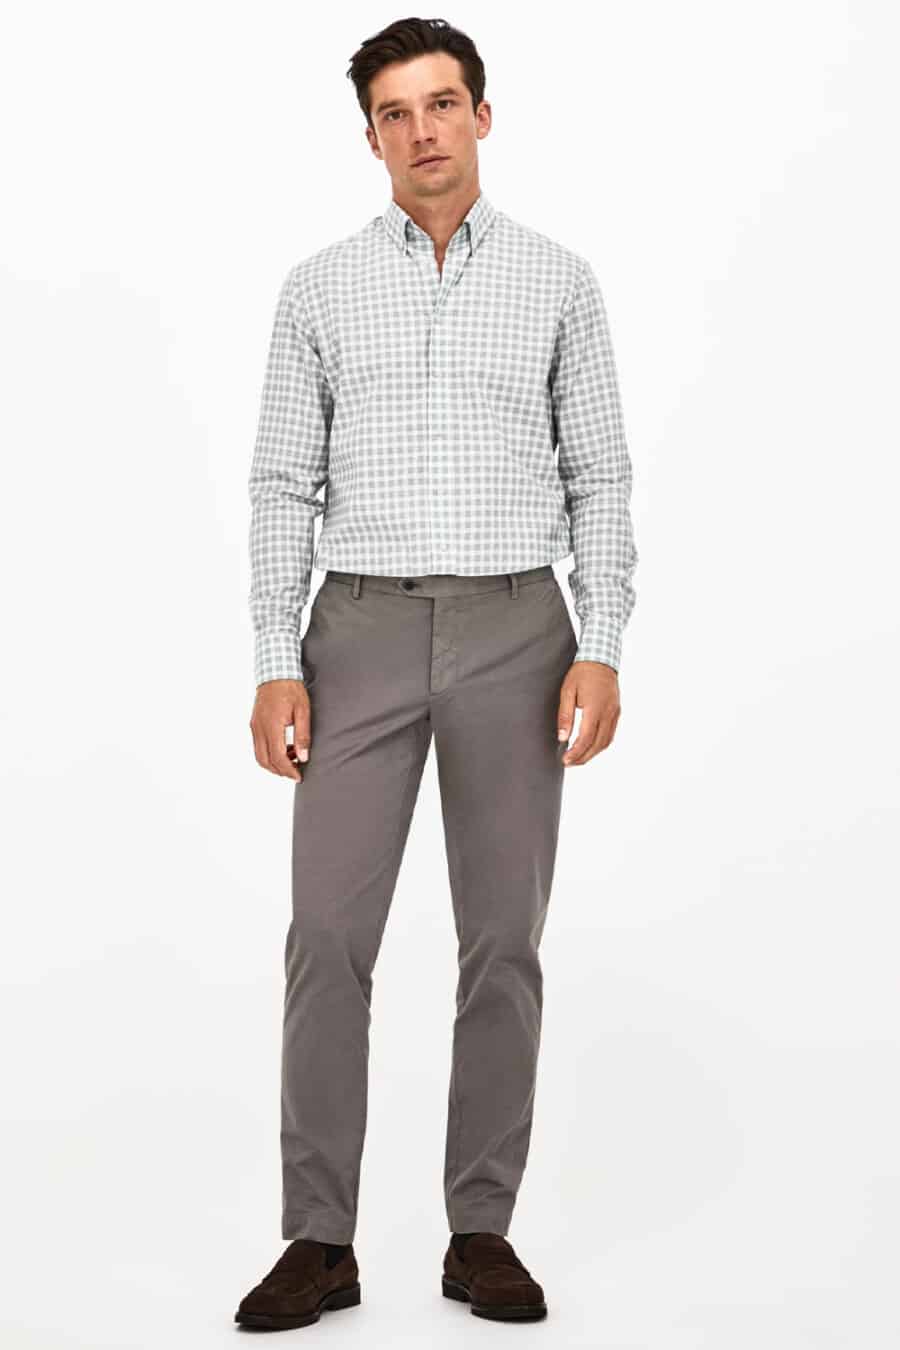 Men's grey chinos, green and white gingham shirt and brown suede loafers outfit